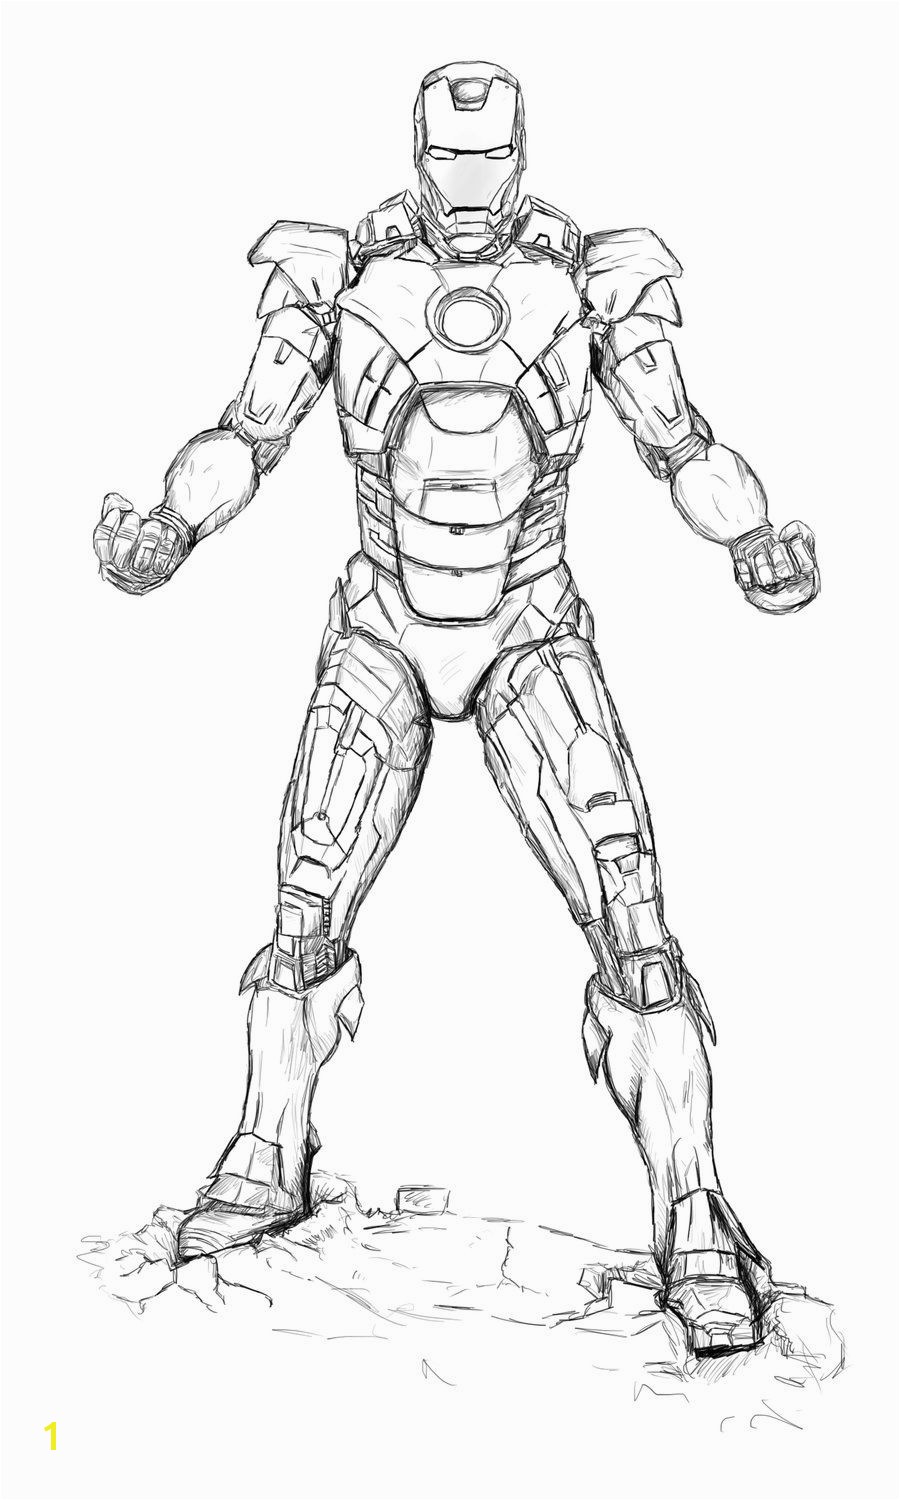 Iron Man Coloring Page Printable Iron Man Coloring Pages for Fun Diys Pinterest